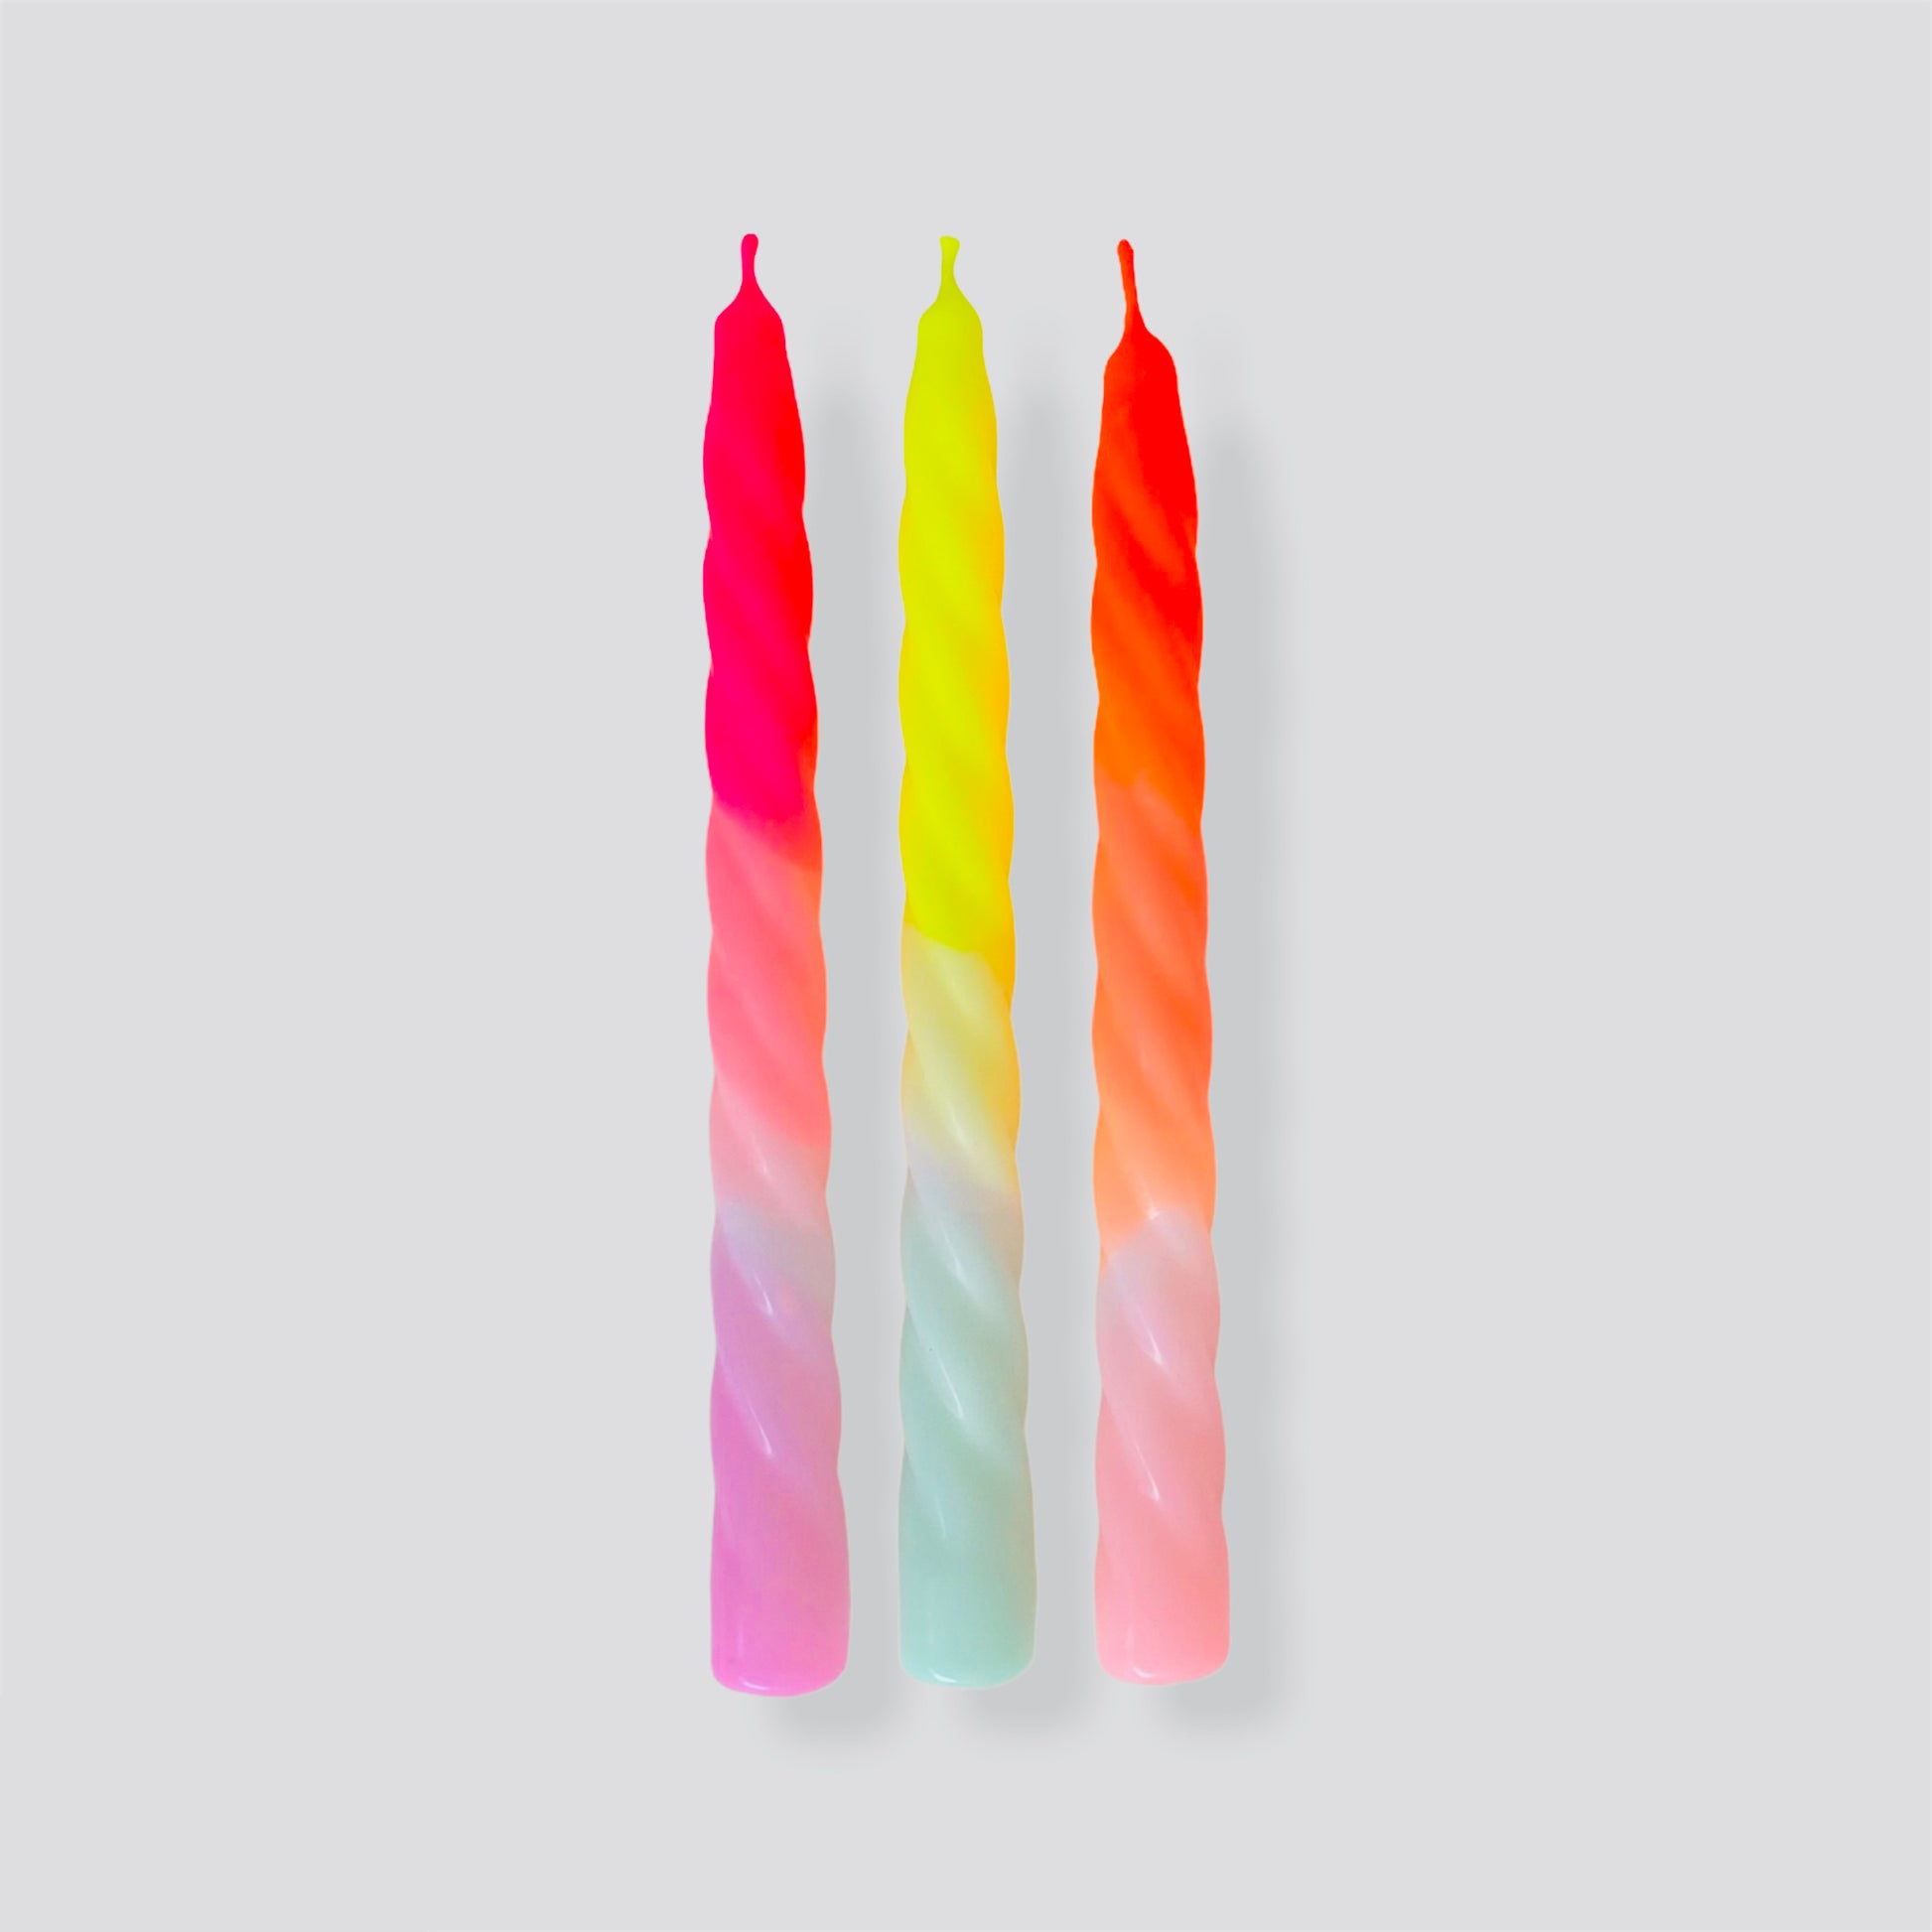 Dip Dye Twisted Candles in Shades of Fruit Salad